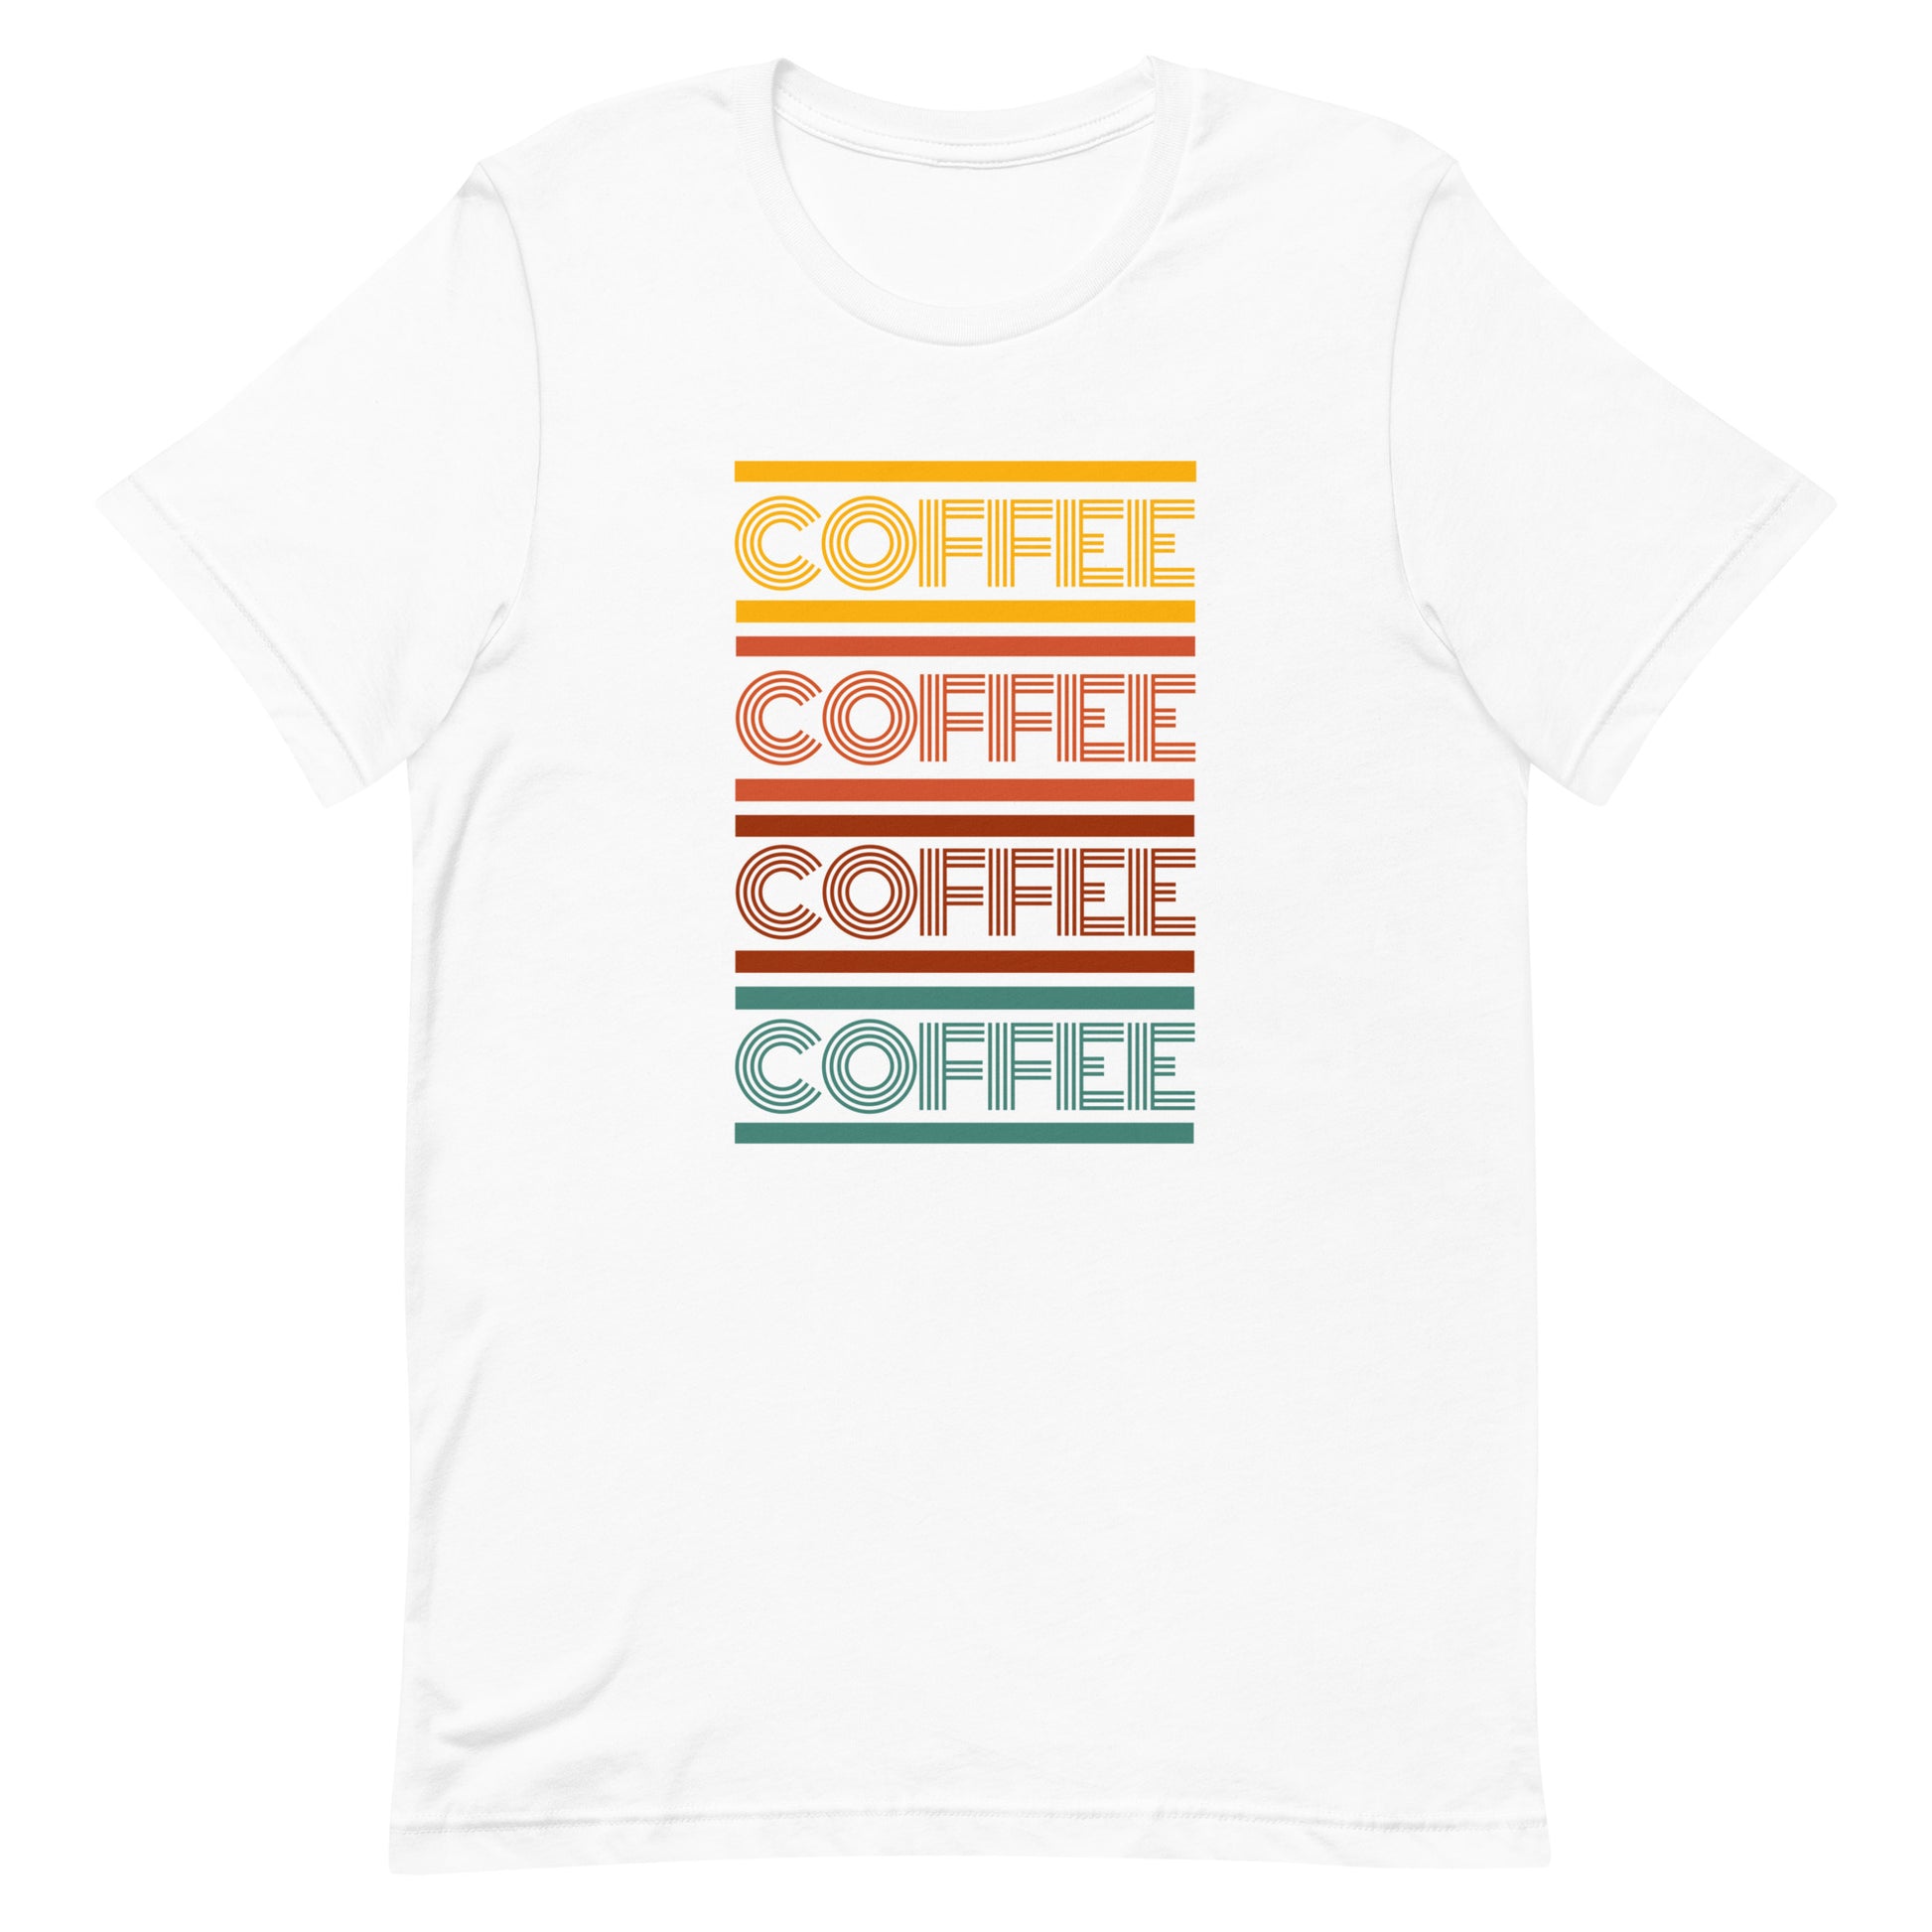 A white coffee t-shirt that has the words coffee repeated in a retro inspired font.